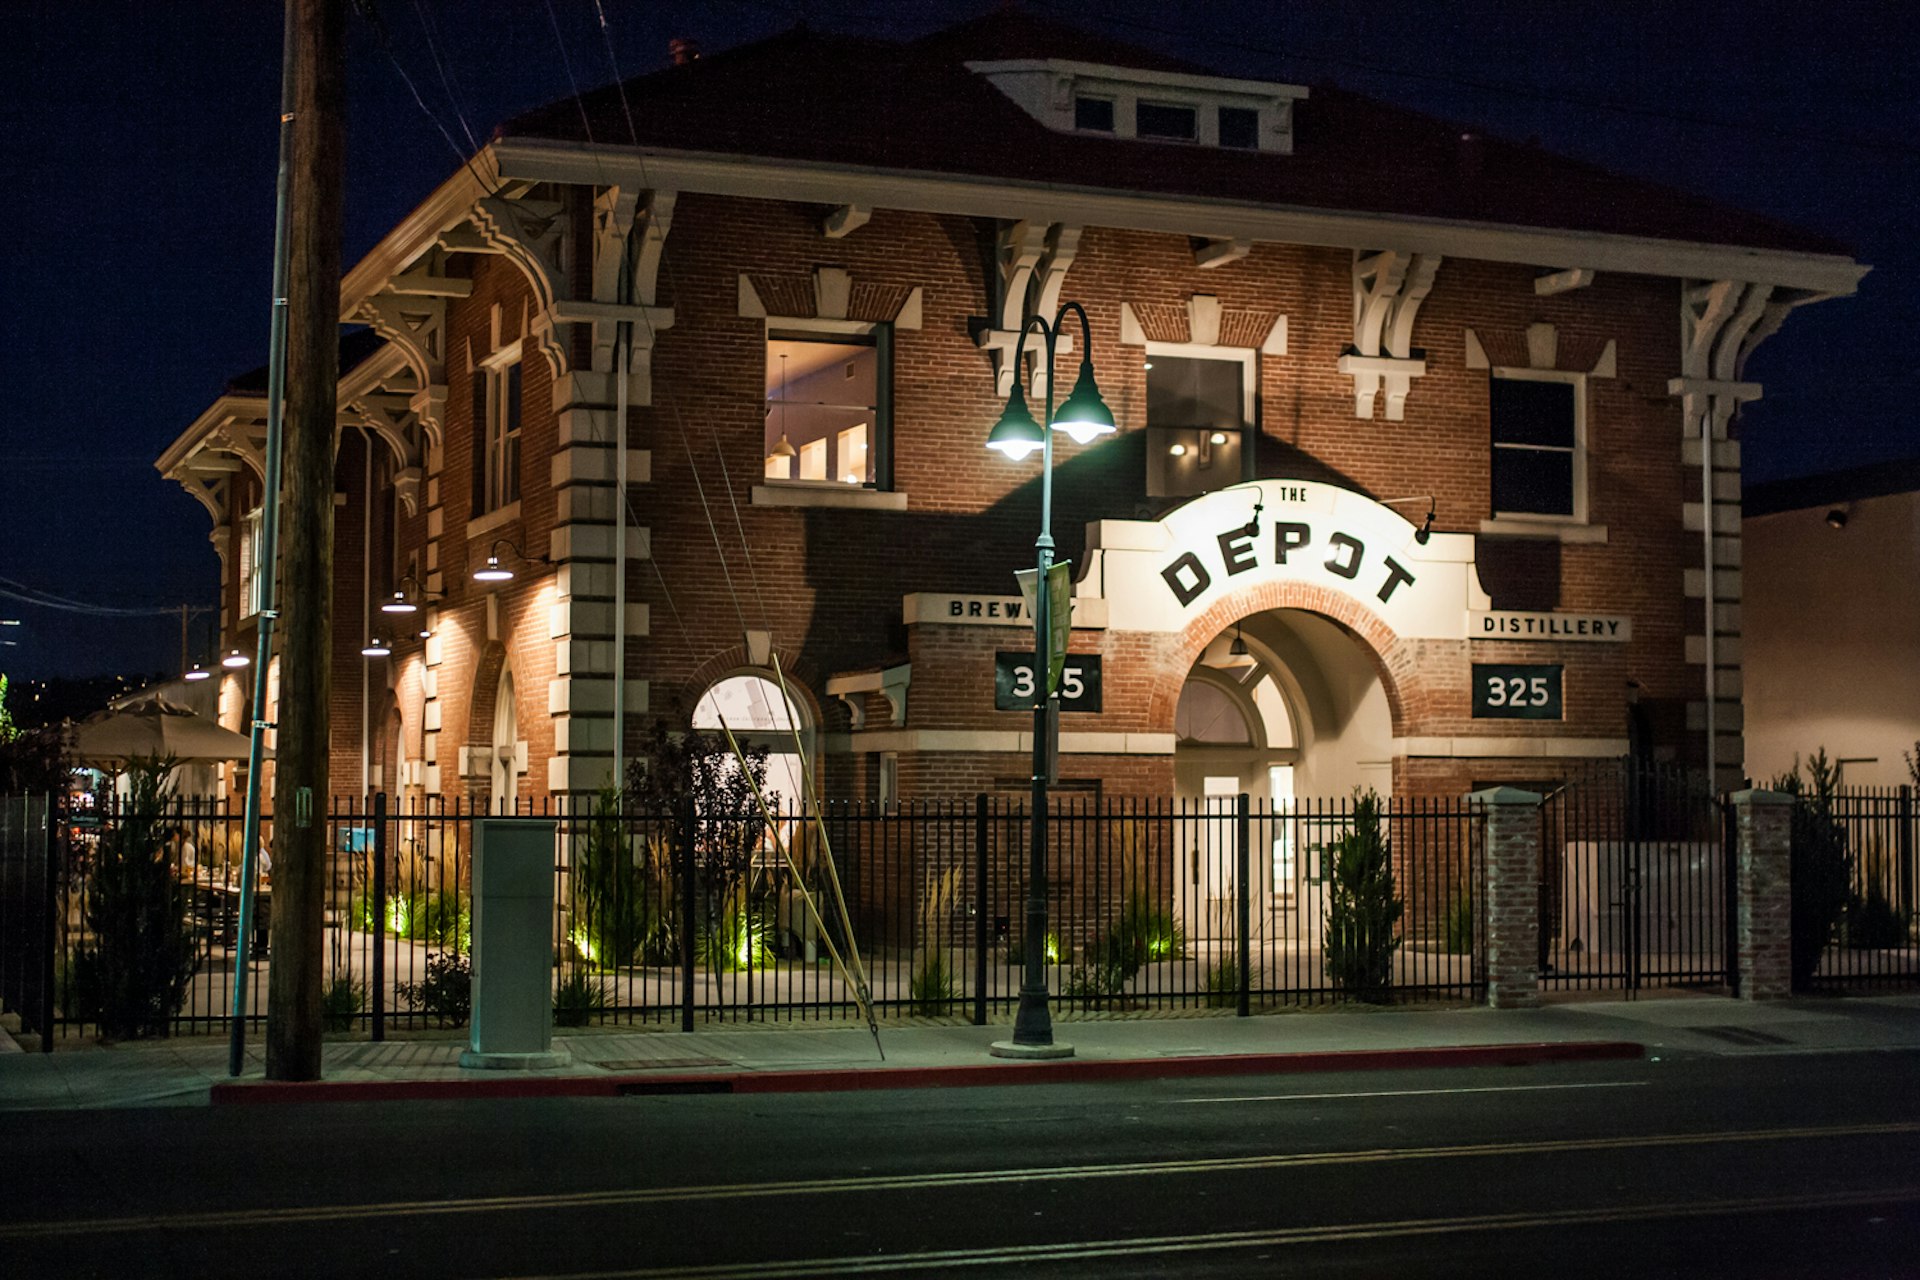 Housed in an old railway station, the Depot is an excellent example of Reno's revitalized areas. Image by Alexander Howard / Lonely Planet